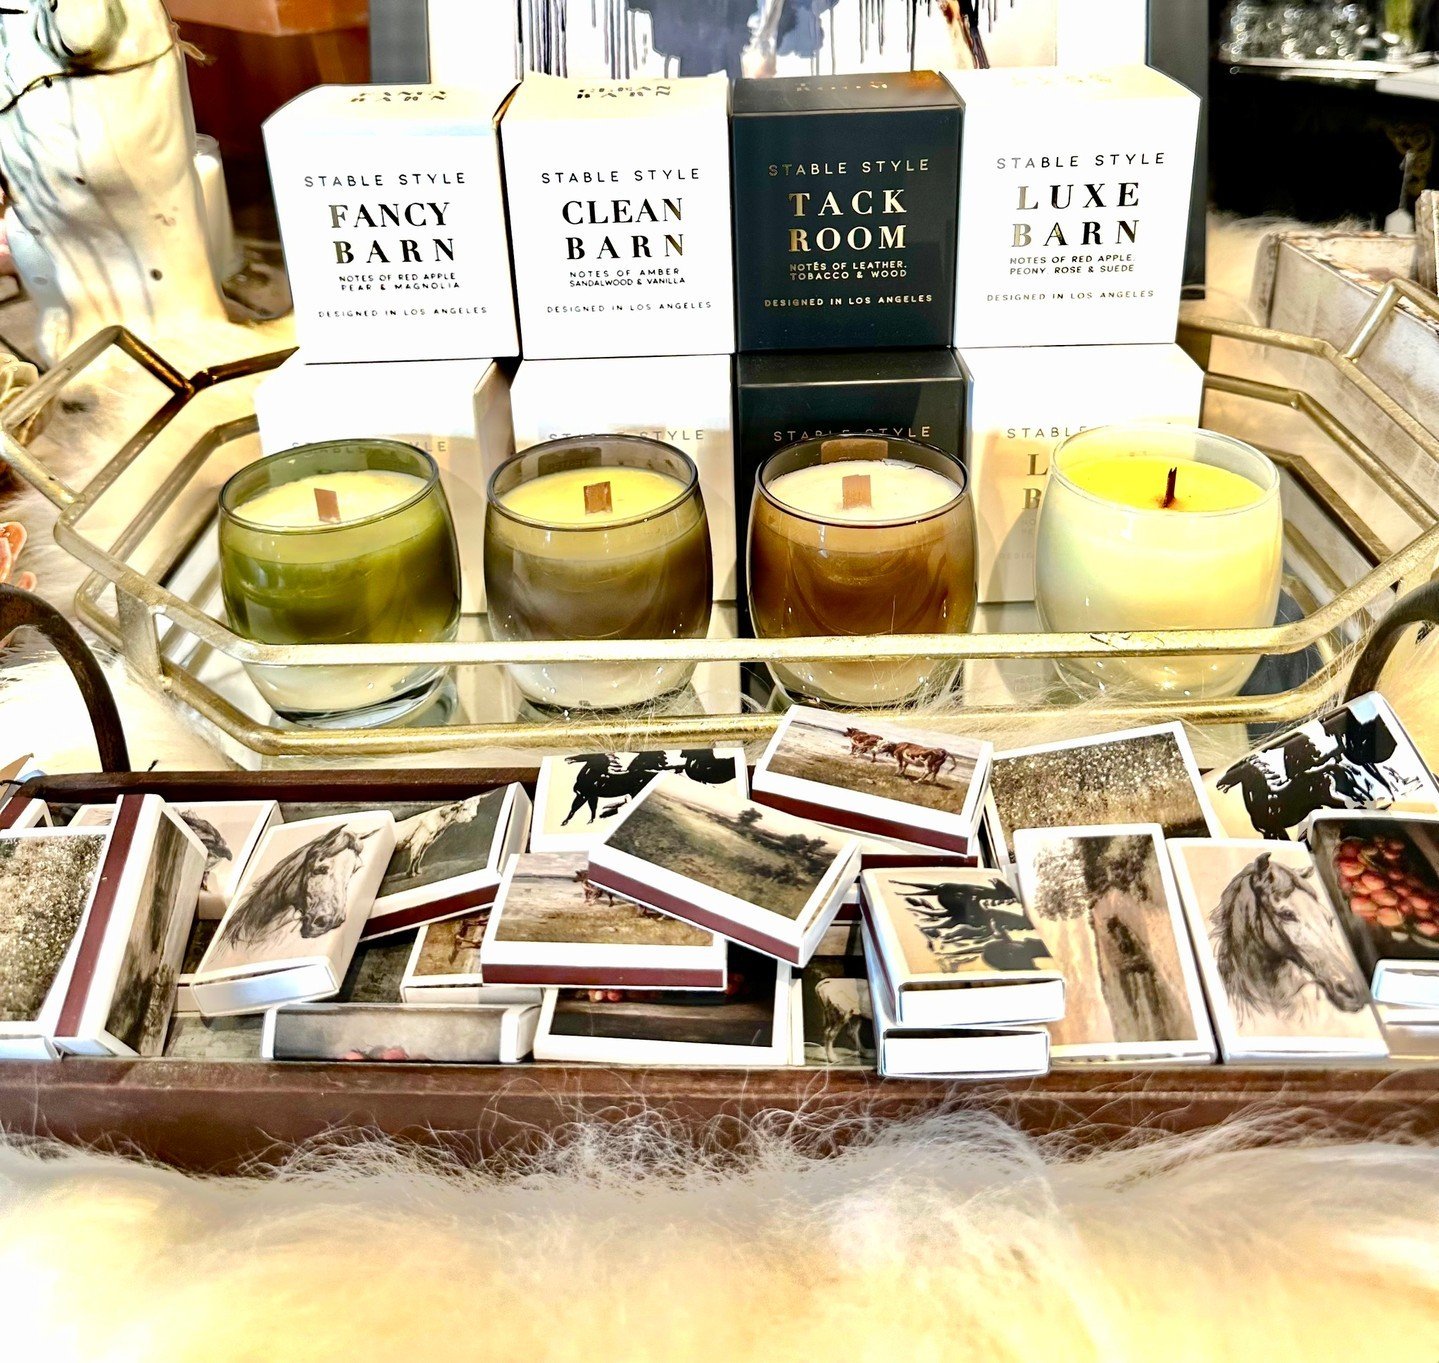 Think candles are overdone for gifting? You&rsquo;ll change your tune when you smell these incredibly unique scents from Stable Style.  Love them all but Tack Room is an all-time favorite. If mom is a horse girl at heart, she&rsquo;ll absolutely ador